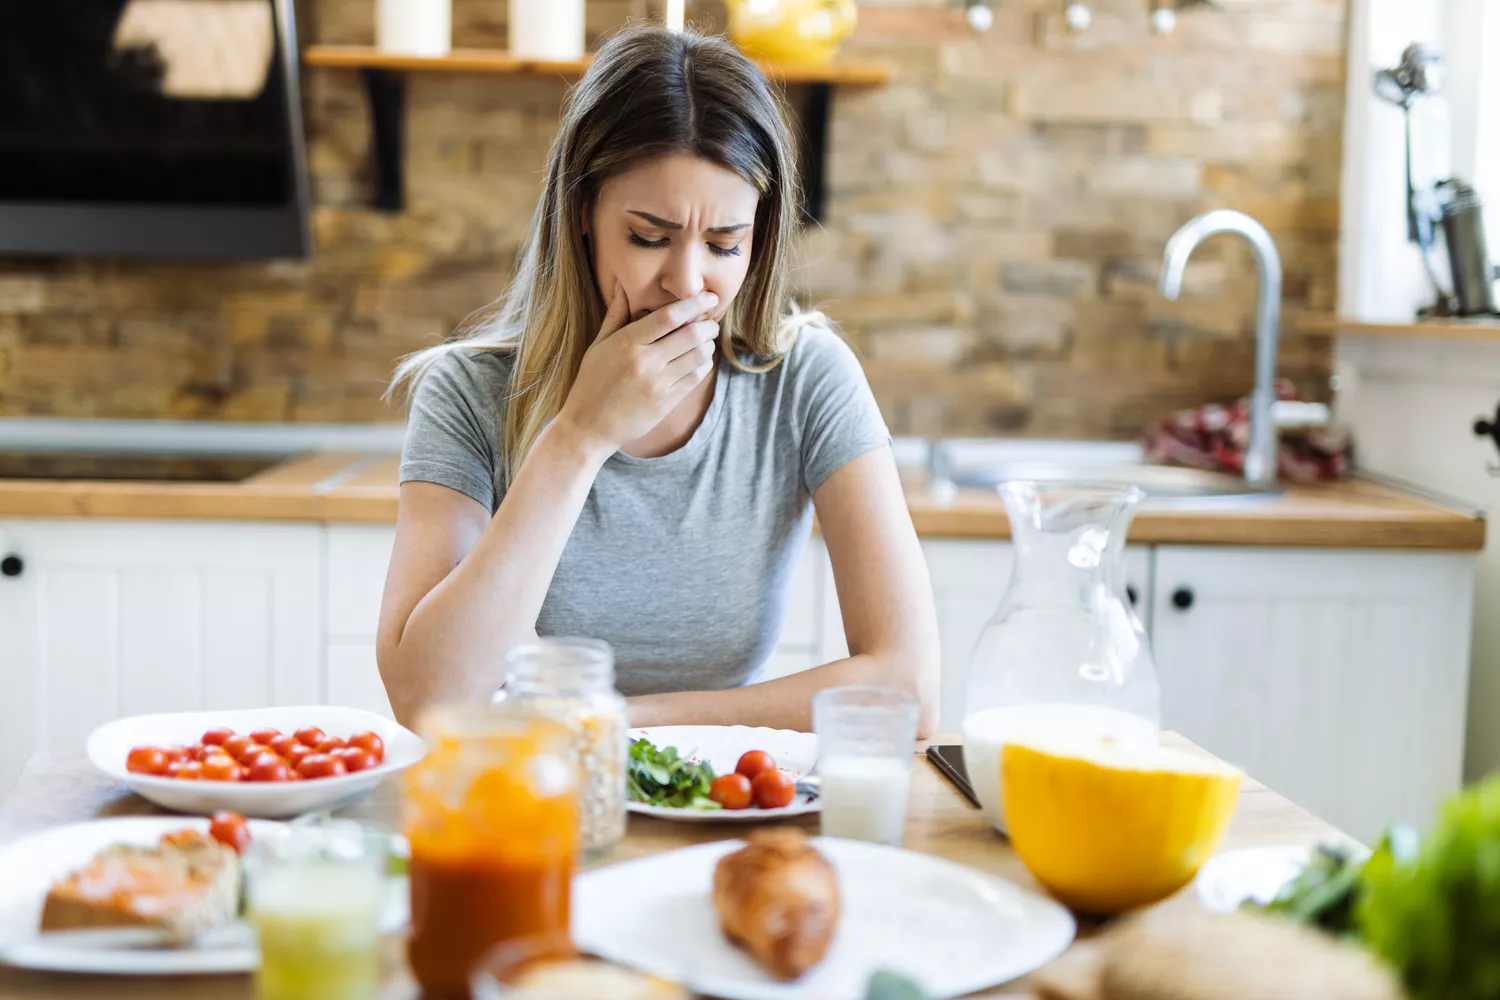 Why You May Be Nauseous After Eating and How to Stop It